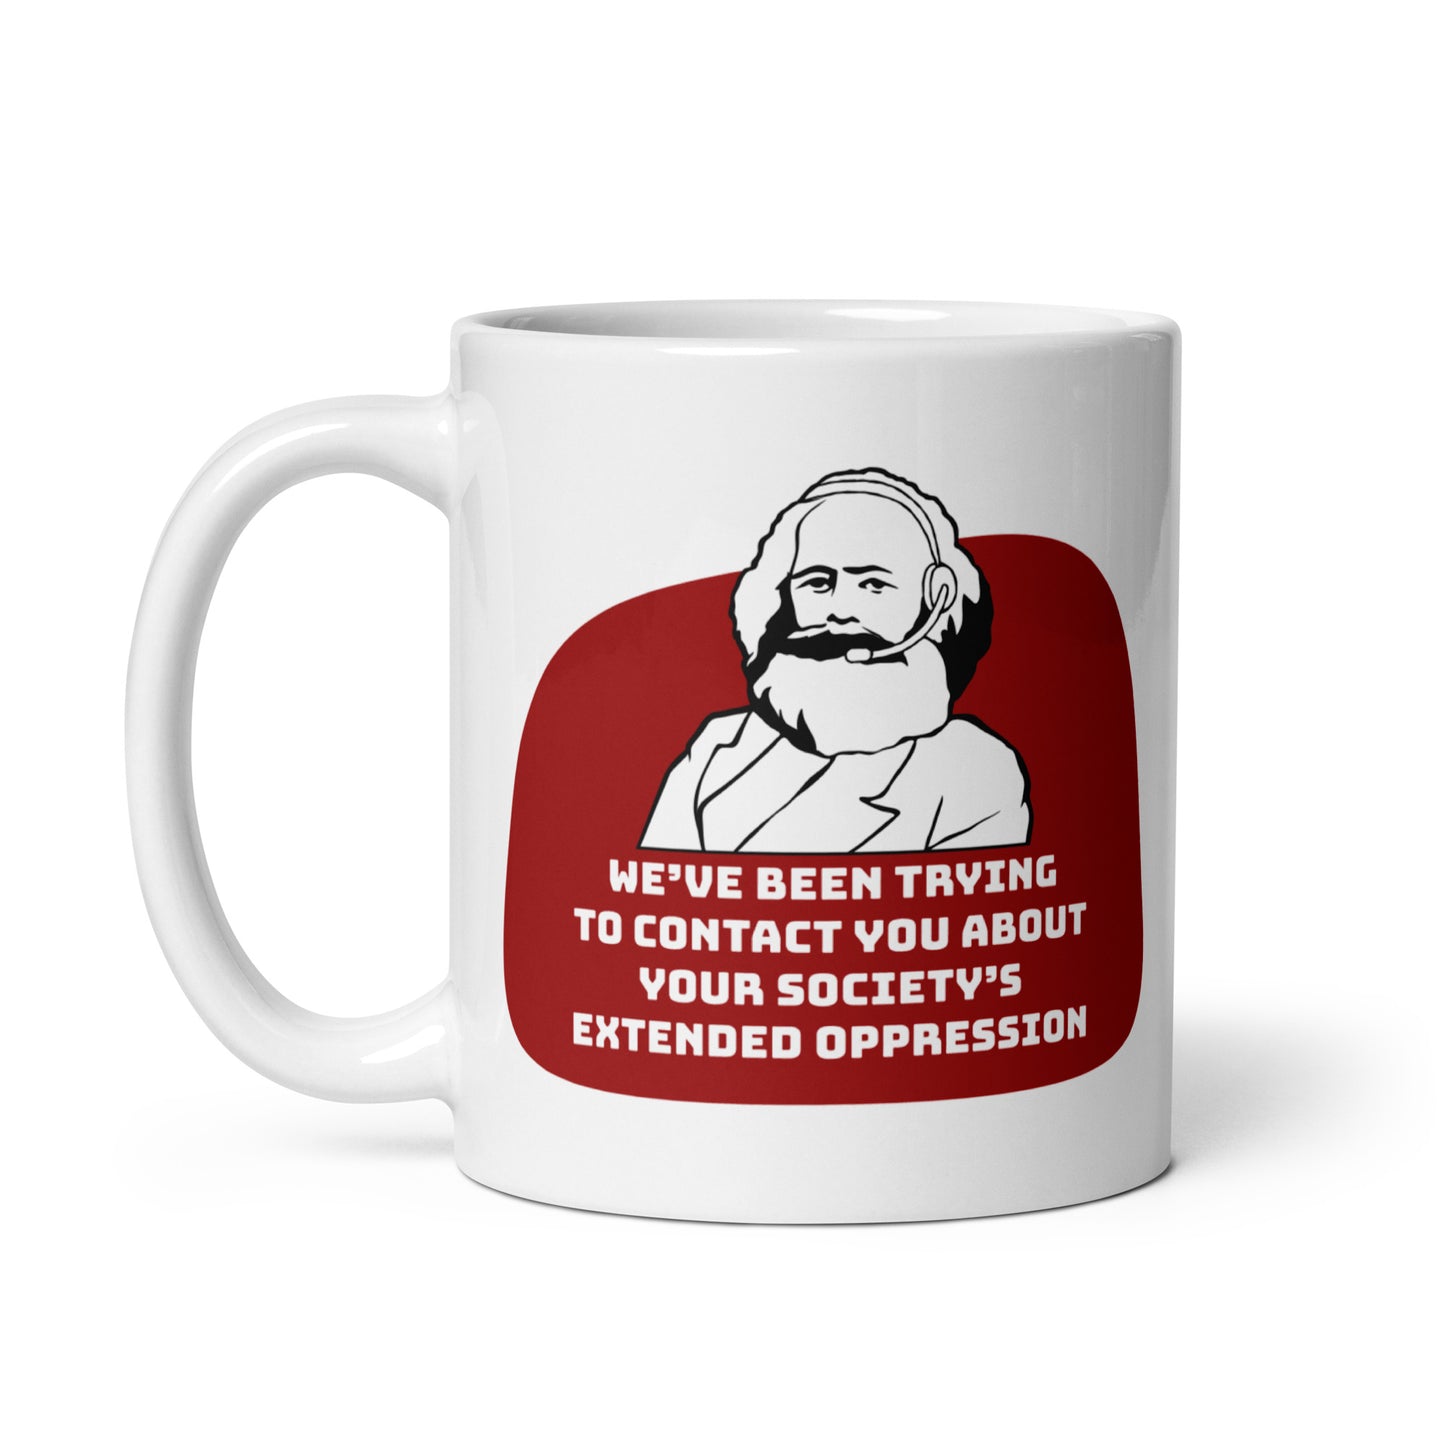 An 11 ounce, white ceramic mug featuring a black and white illustration of Karl Marx wearing a telemarketer headset. Text beneath Marx reads "We've been trying to contact you about your society's extended oppression." in a blocky font.